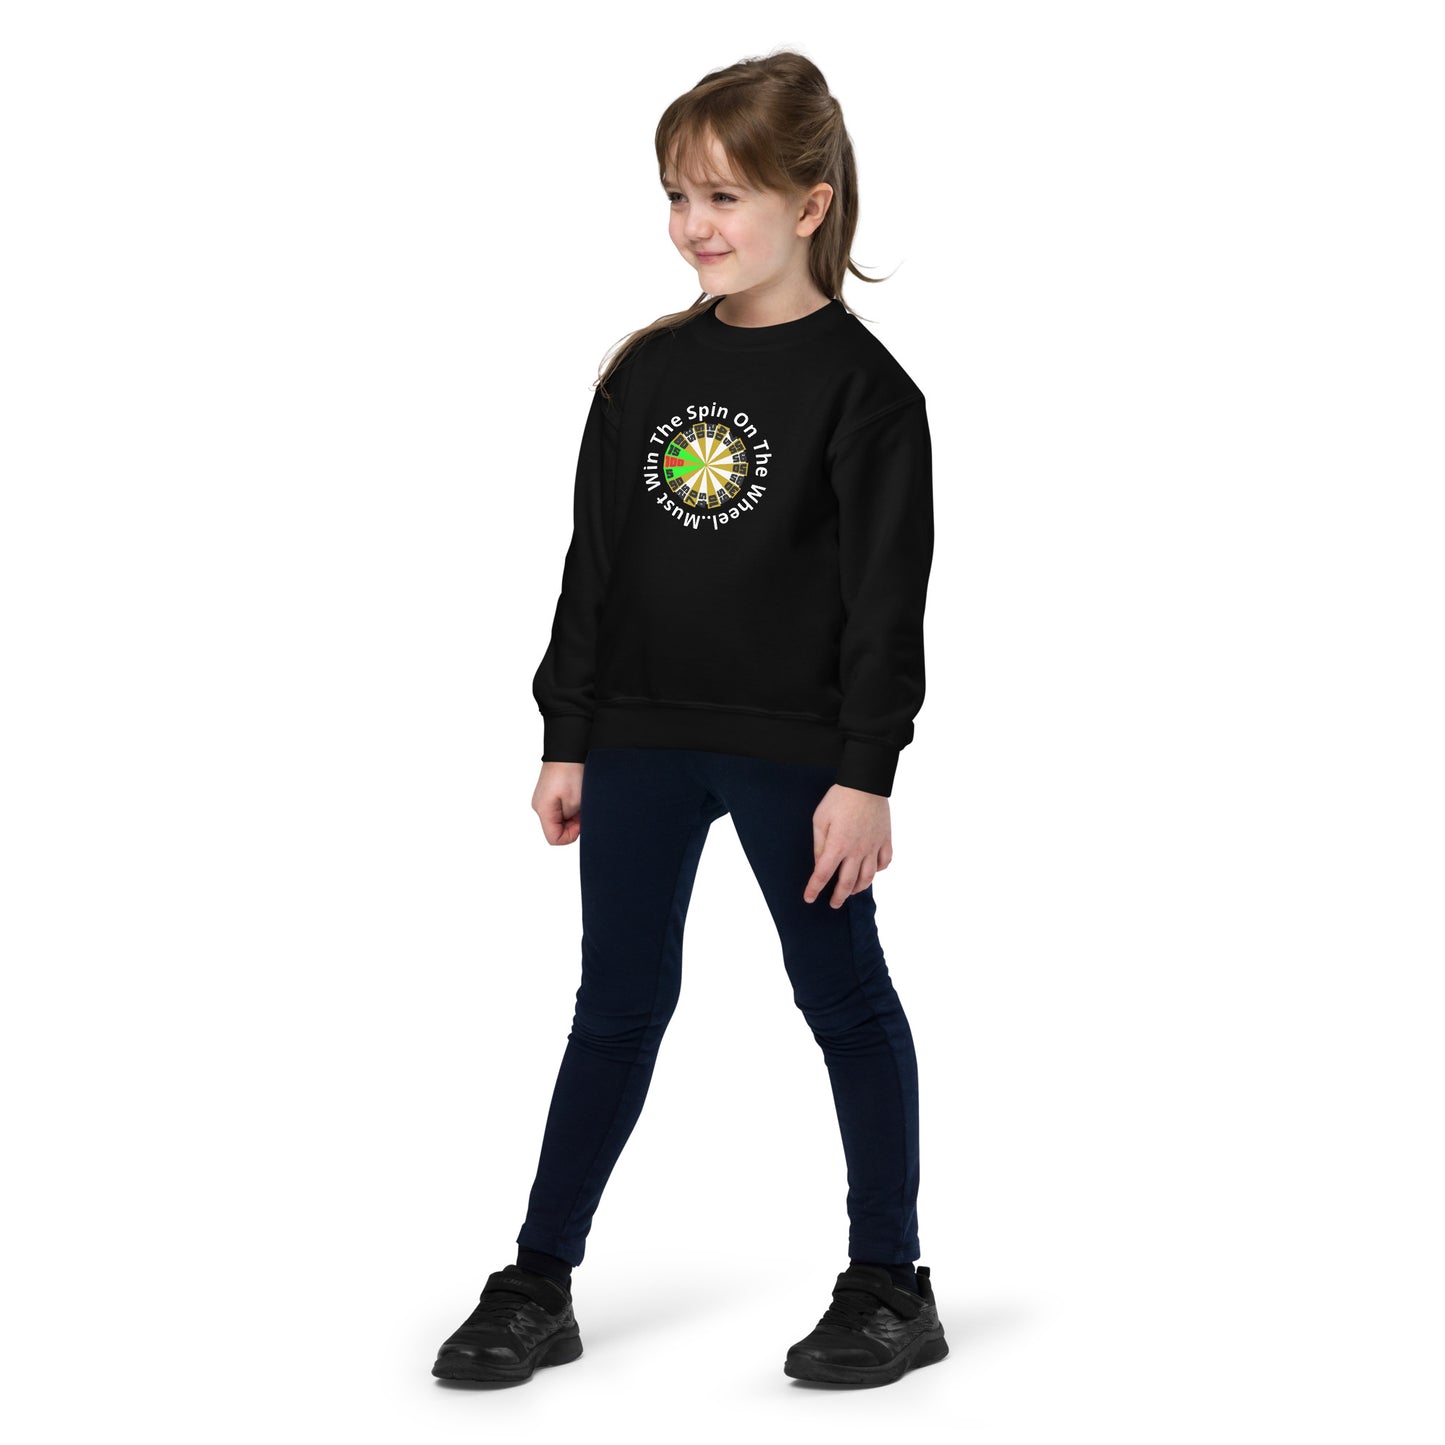 Youth crewneck sweatshirt - The Price Is Right - Spin The Wheel on Front - Greeting to Family & Friends on Back